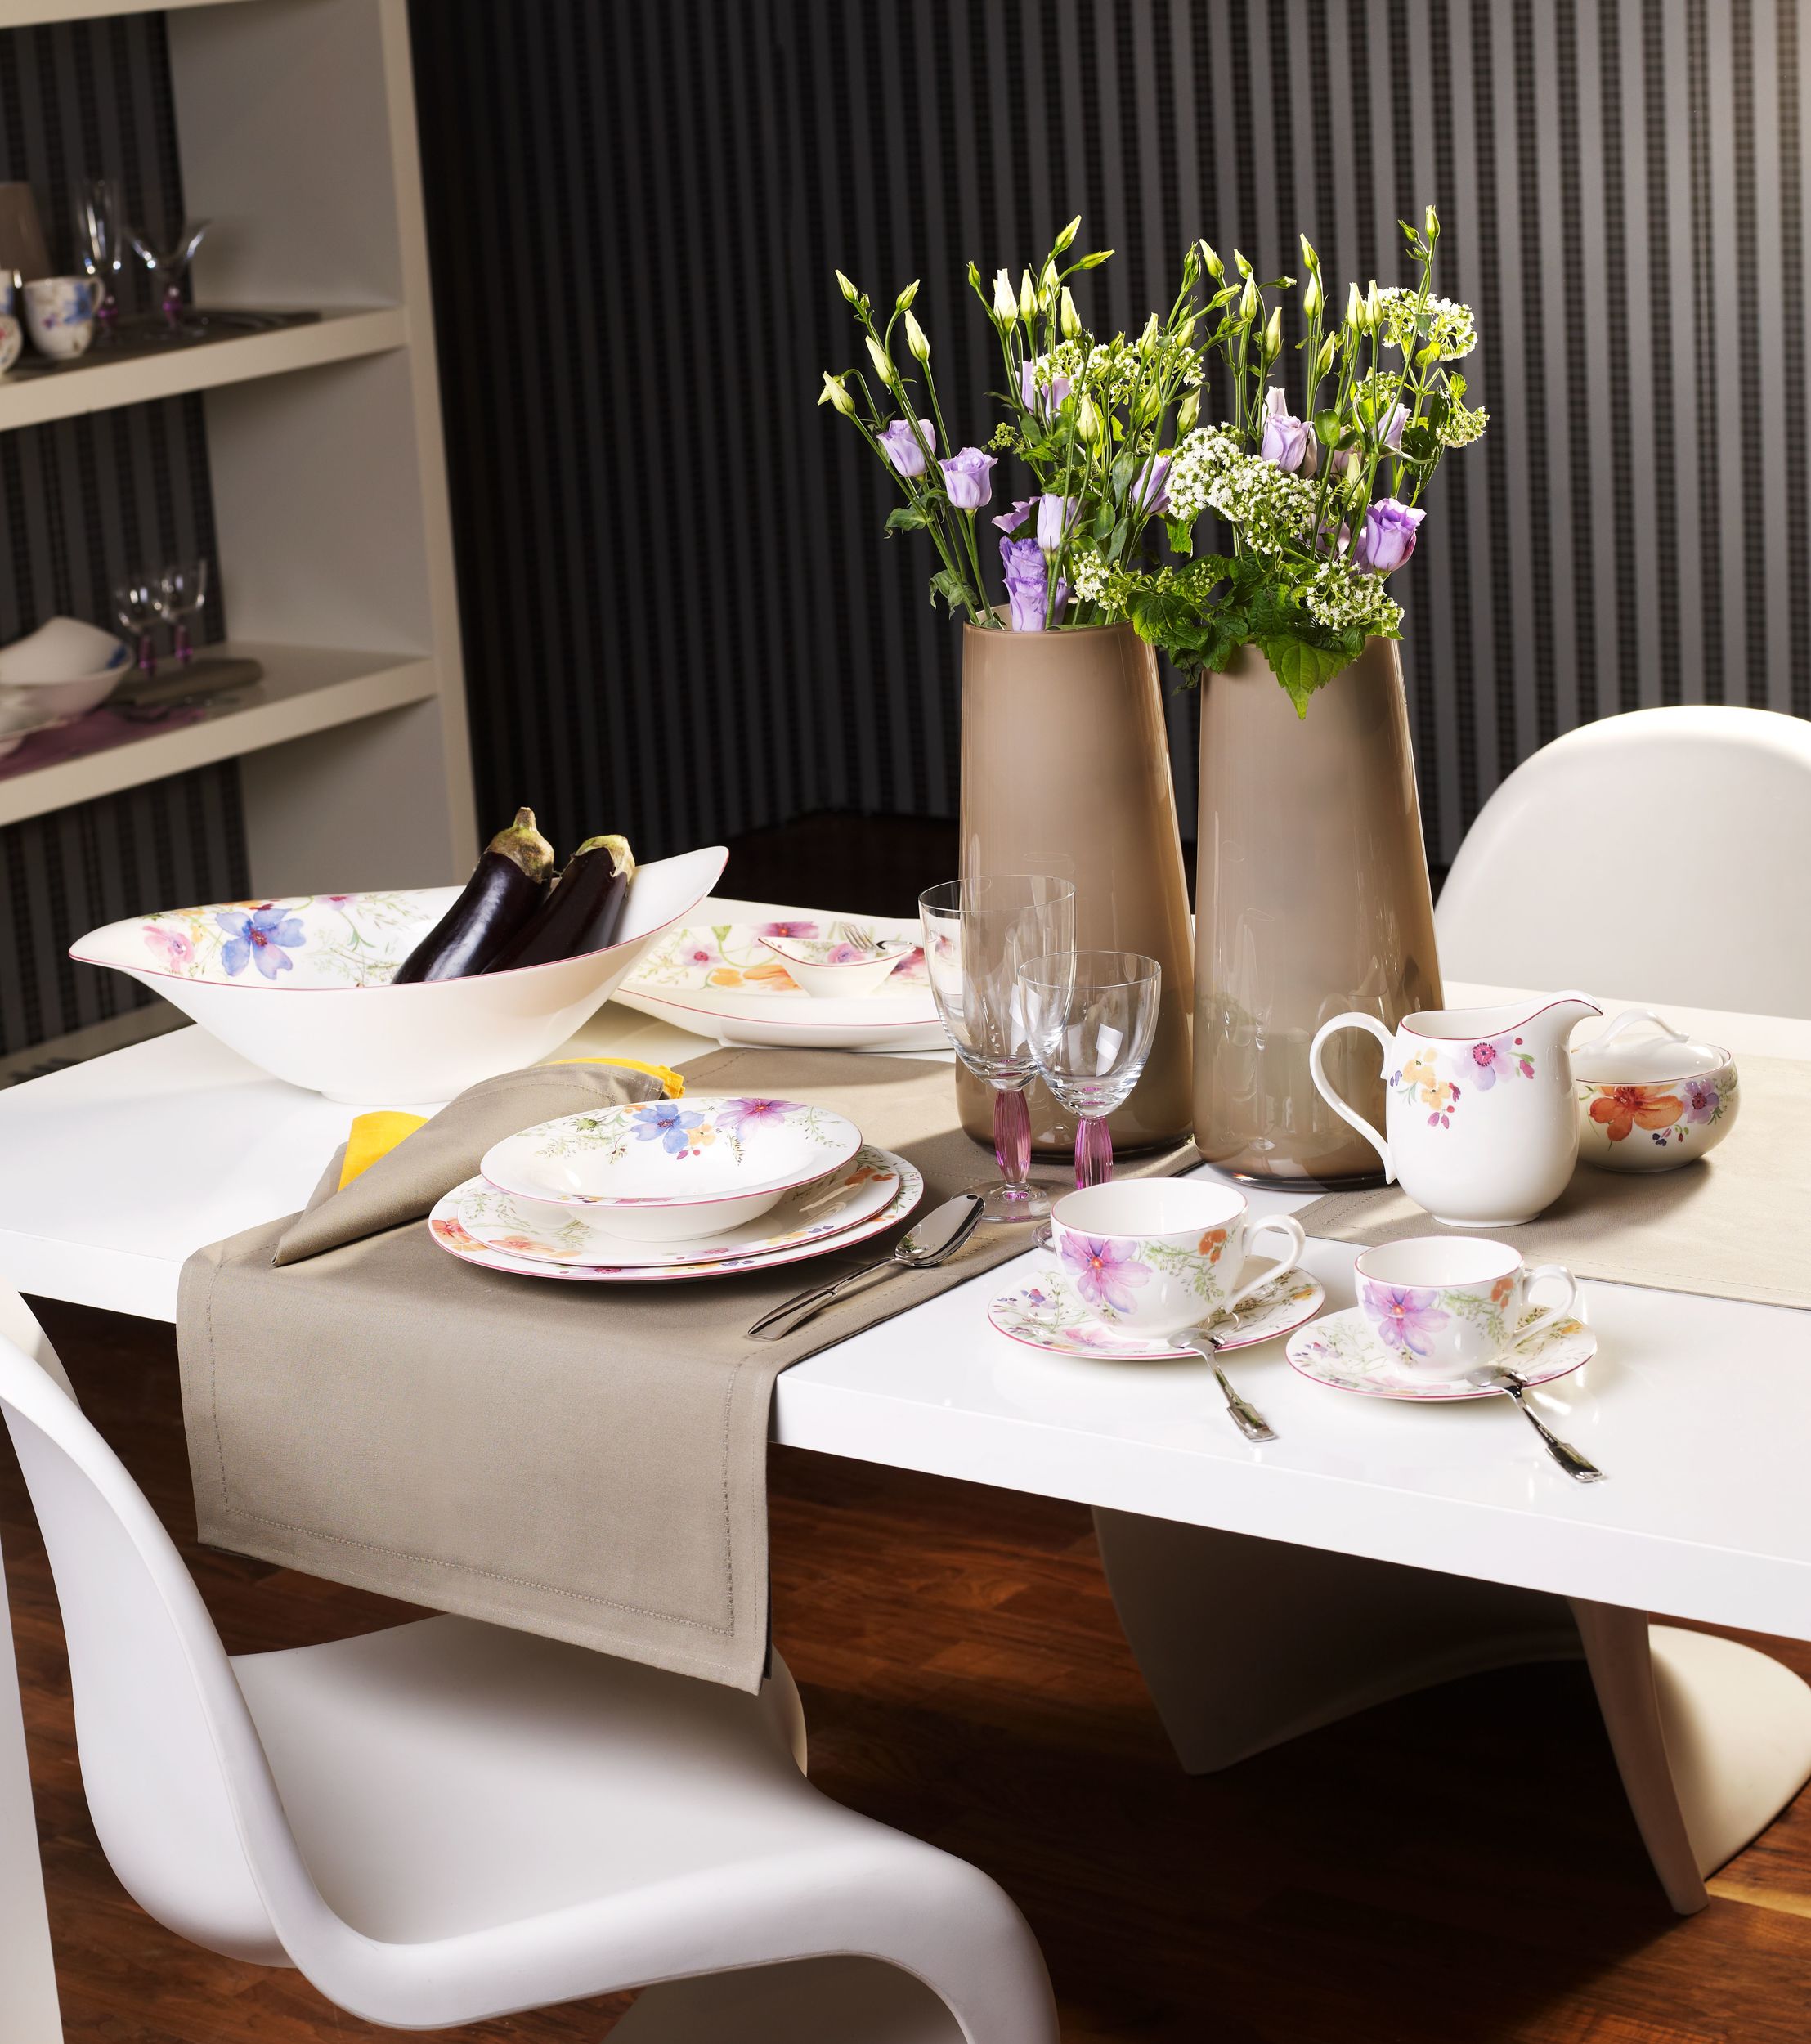 Add Elegance and Functionality with Villeroy and Boch Accessories